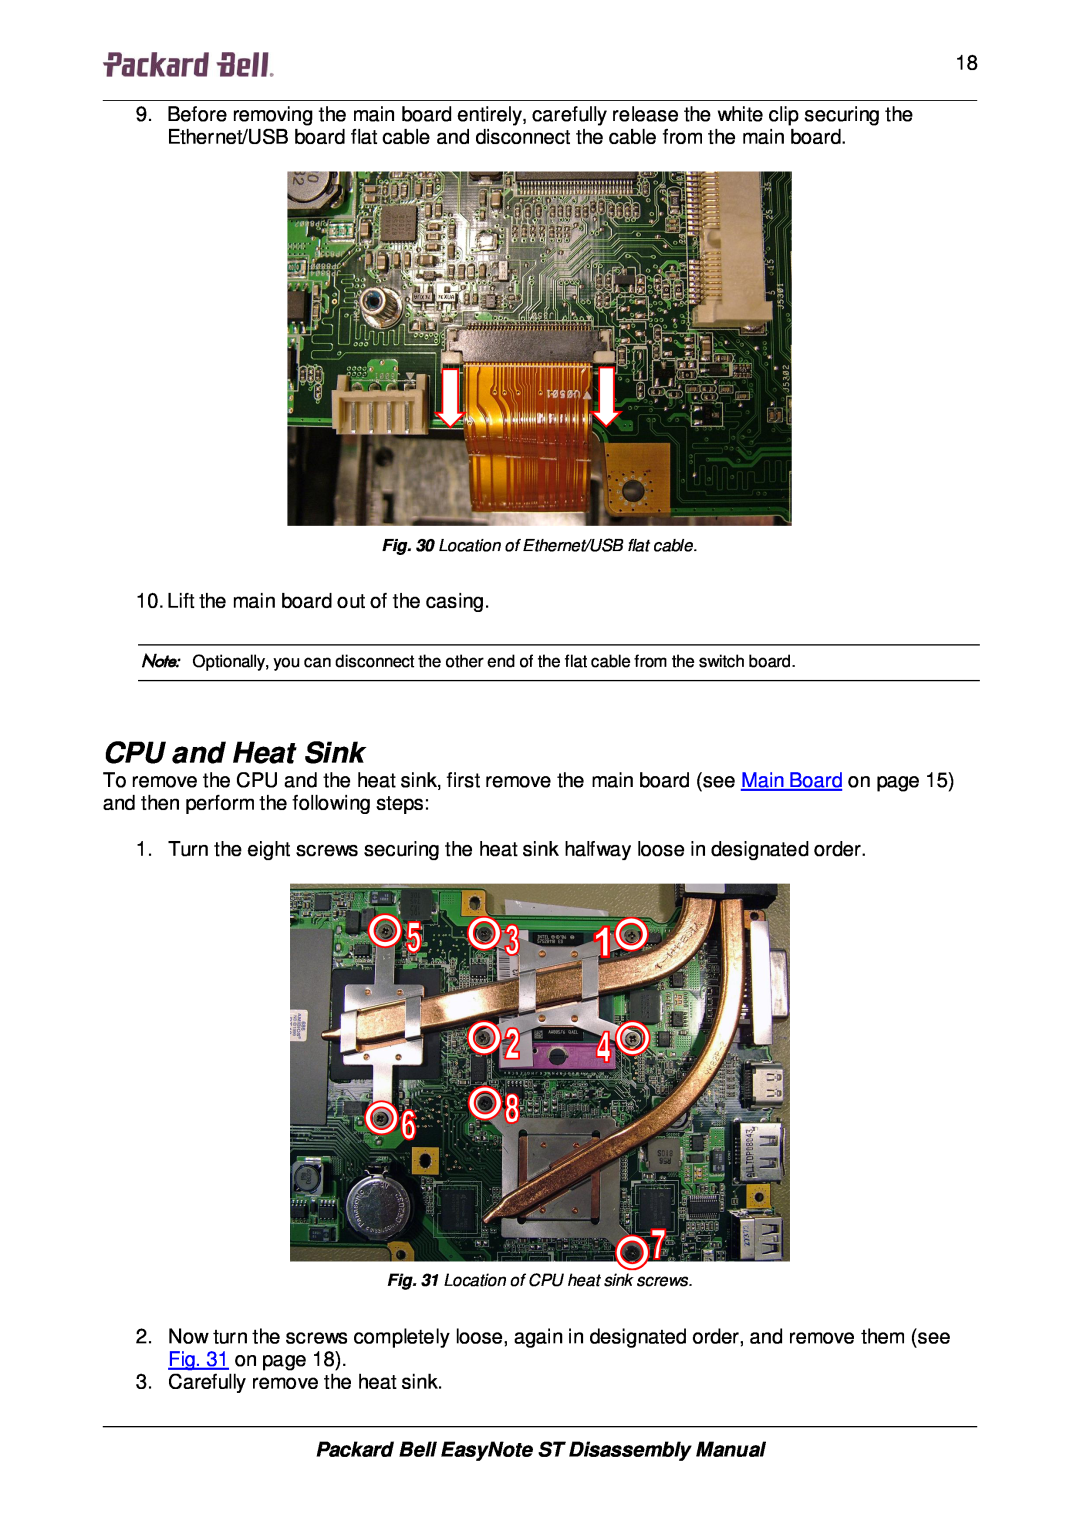 Packard Bell manual CPU and Heat Sink, Packard Bell EasyNote ST Disassembly Manual 